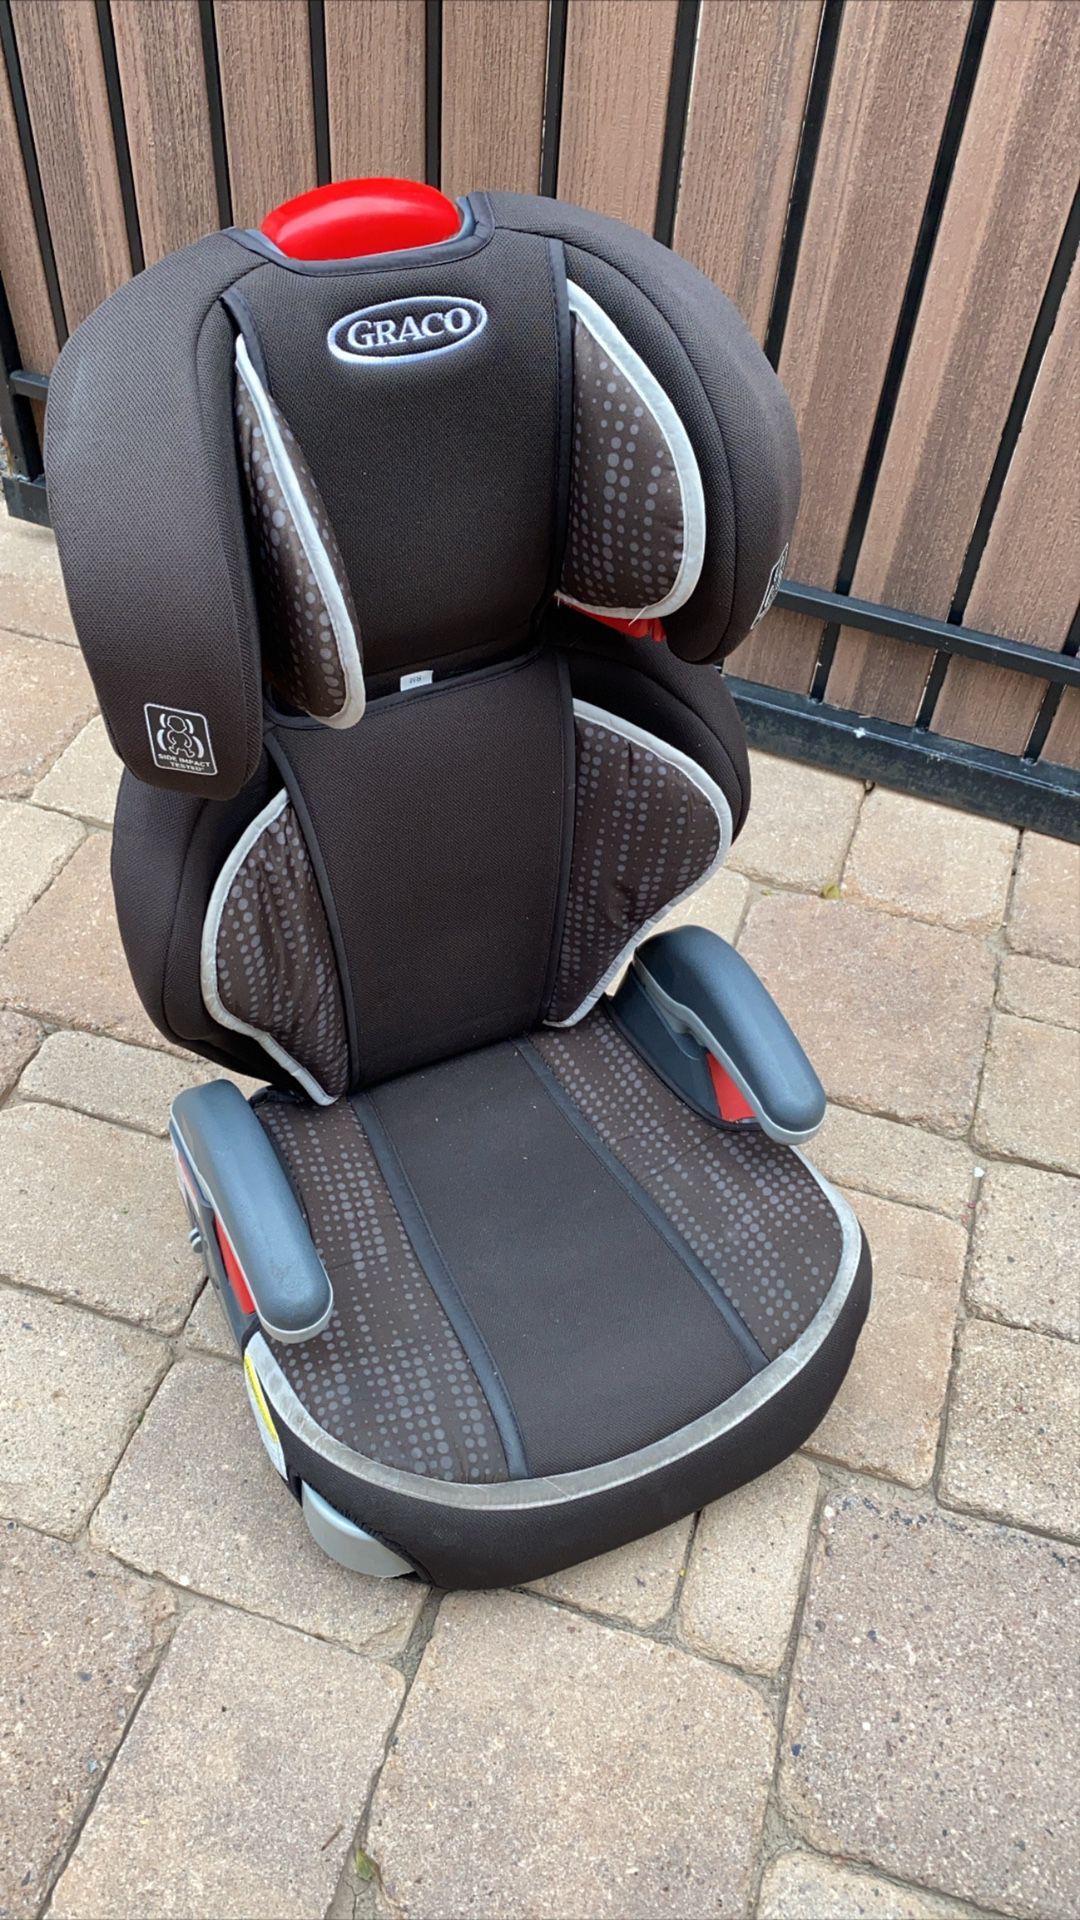 Grace- booster seat with removable back